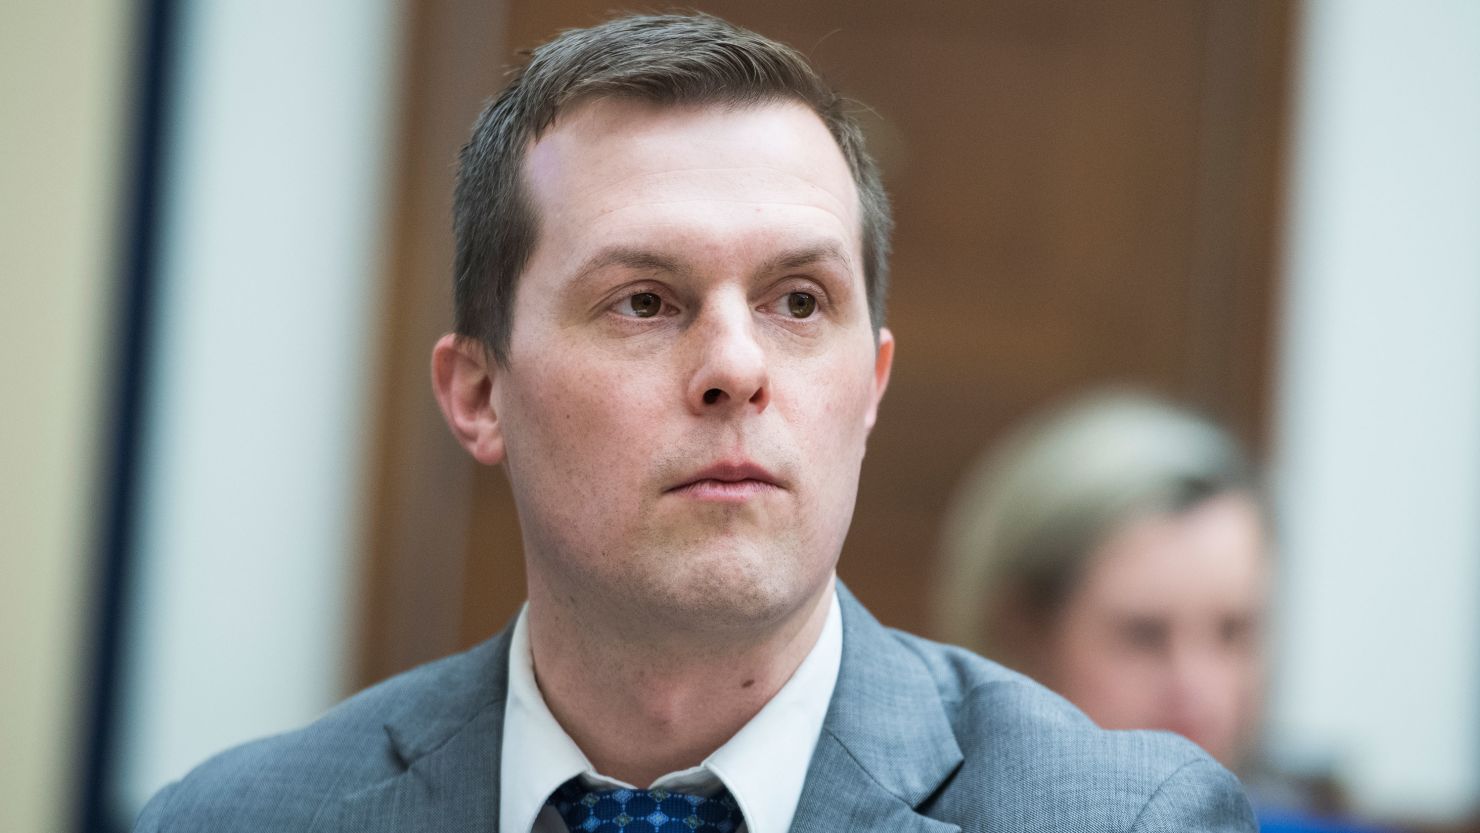 Rep. Jared Golden, a Maine Democrat, is seen during a House Armed Services Committee hearing titled "Outside Perspectives on Nuclear Deterrence Policy and Posture" in Washington.